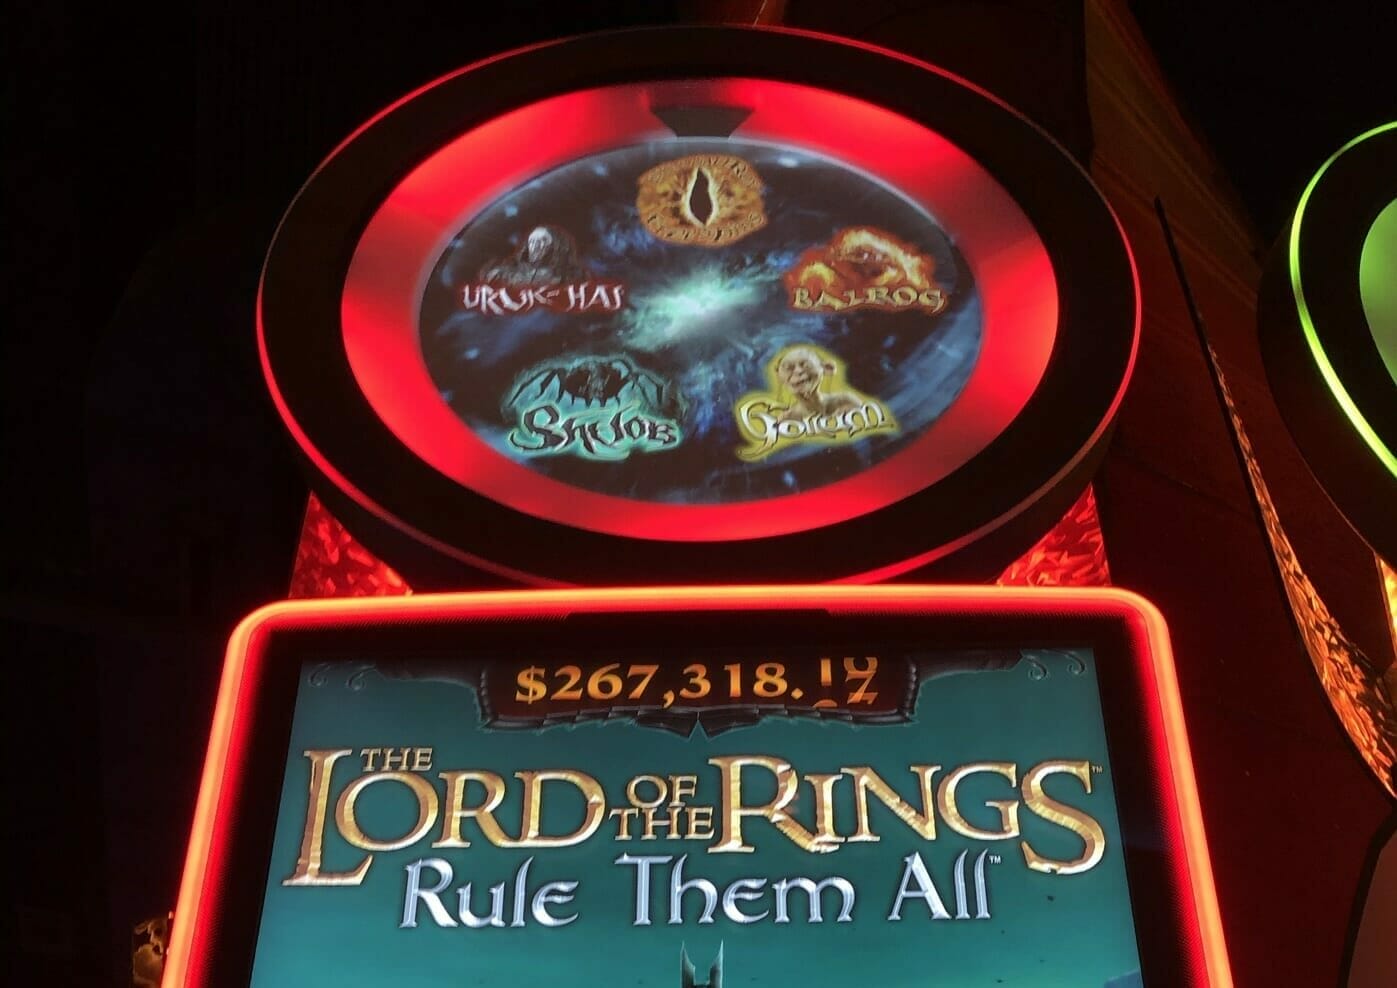 We need one Lord of the Rings game to rule them all